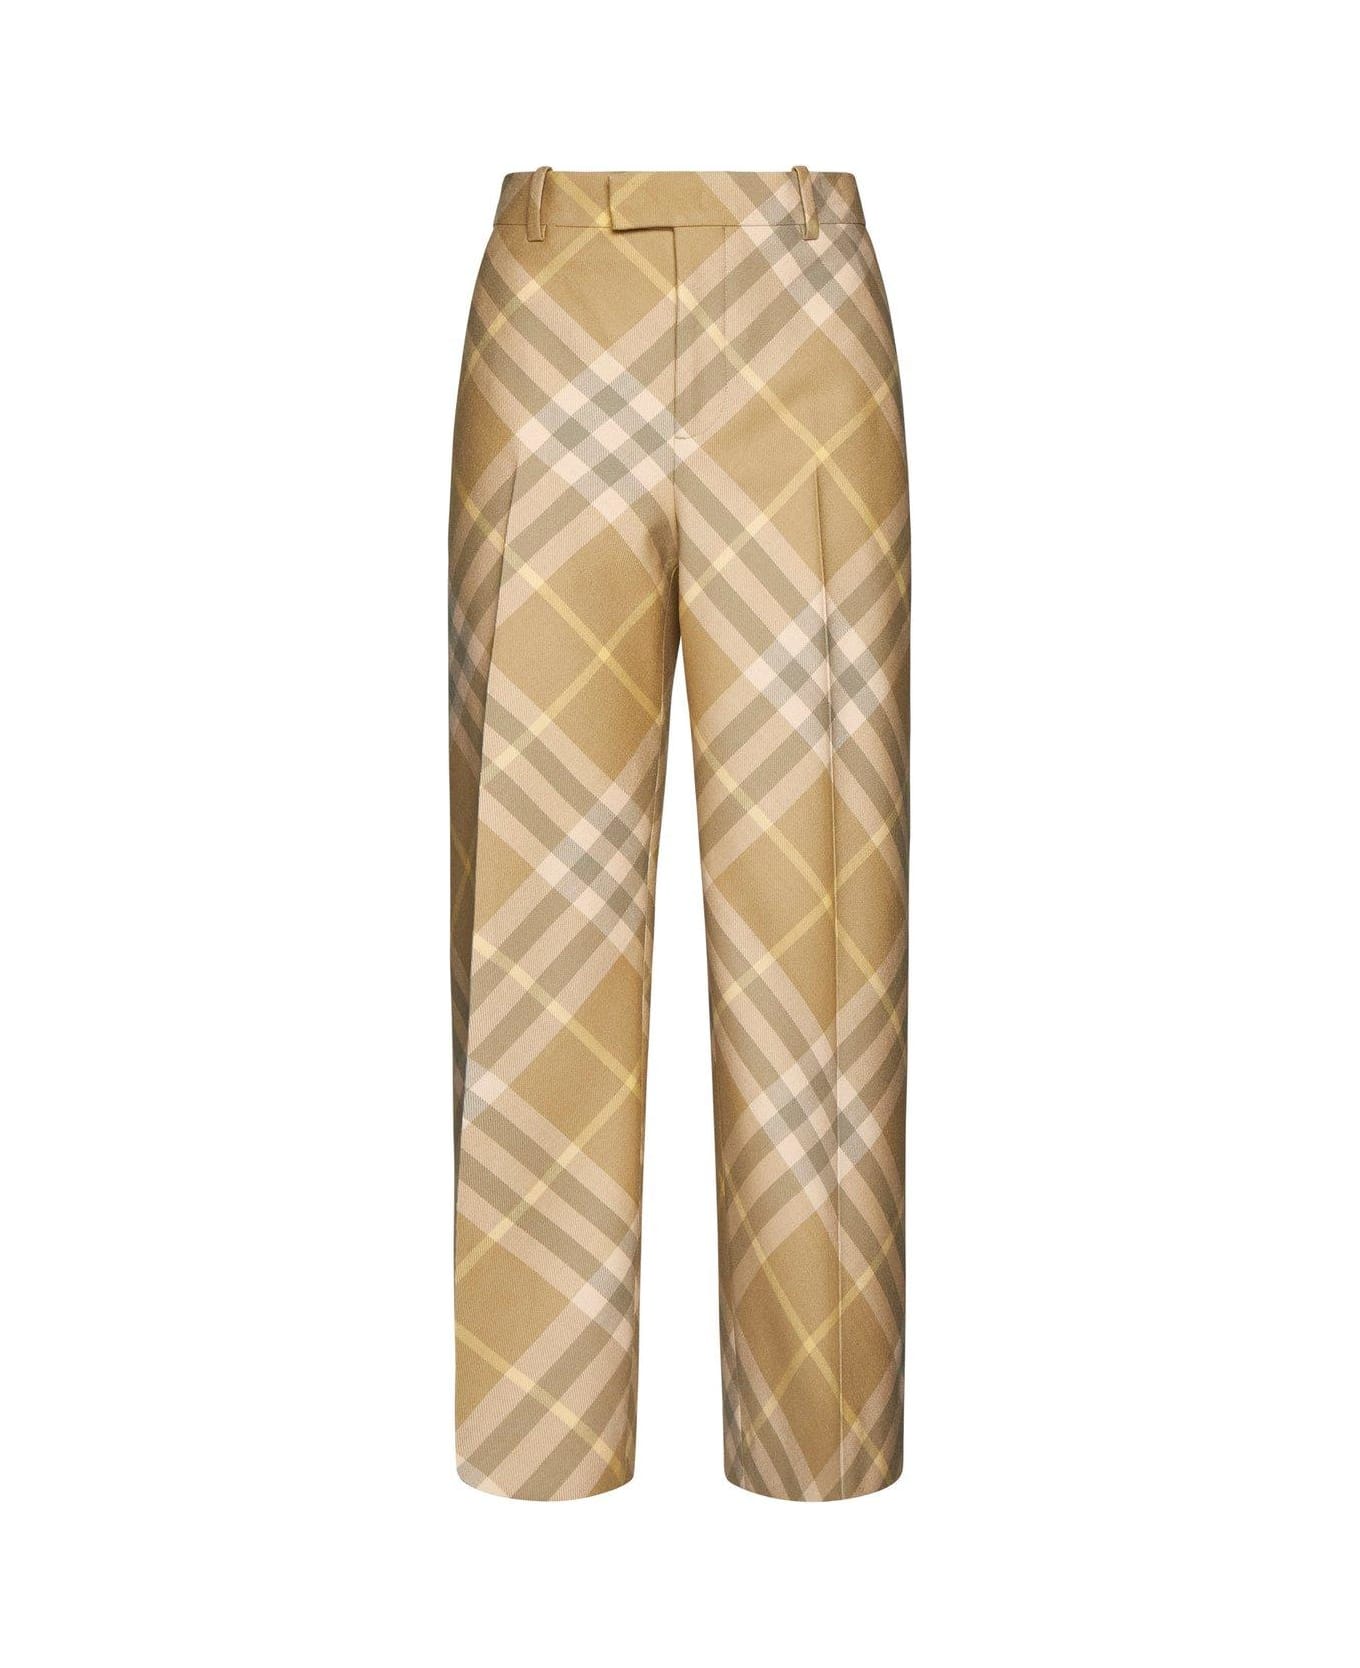 Burberry Check-printed Straight-leg Tailored Trousers - Beige